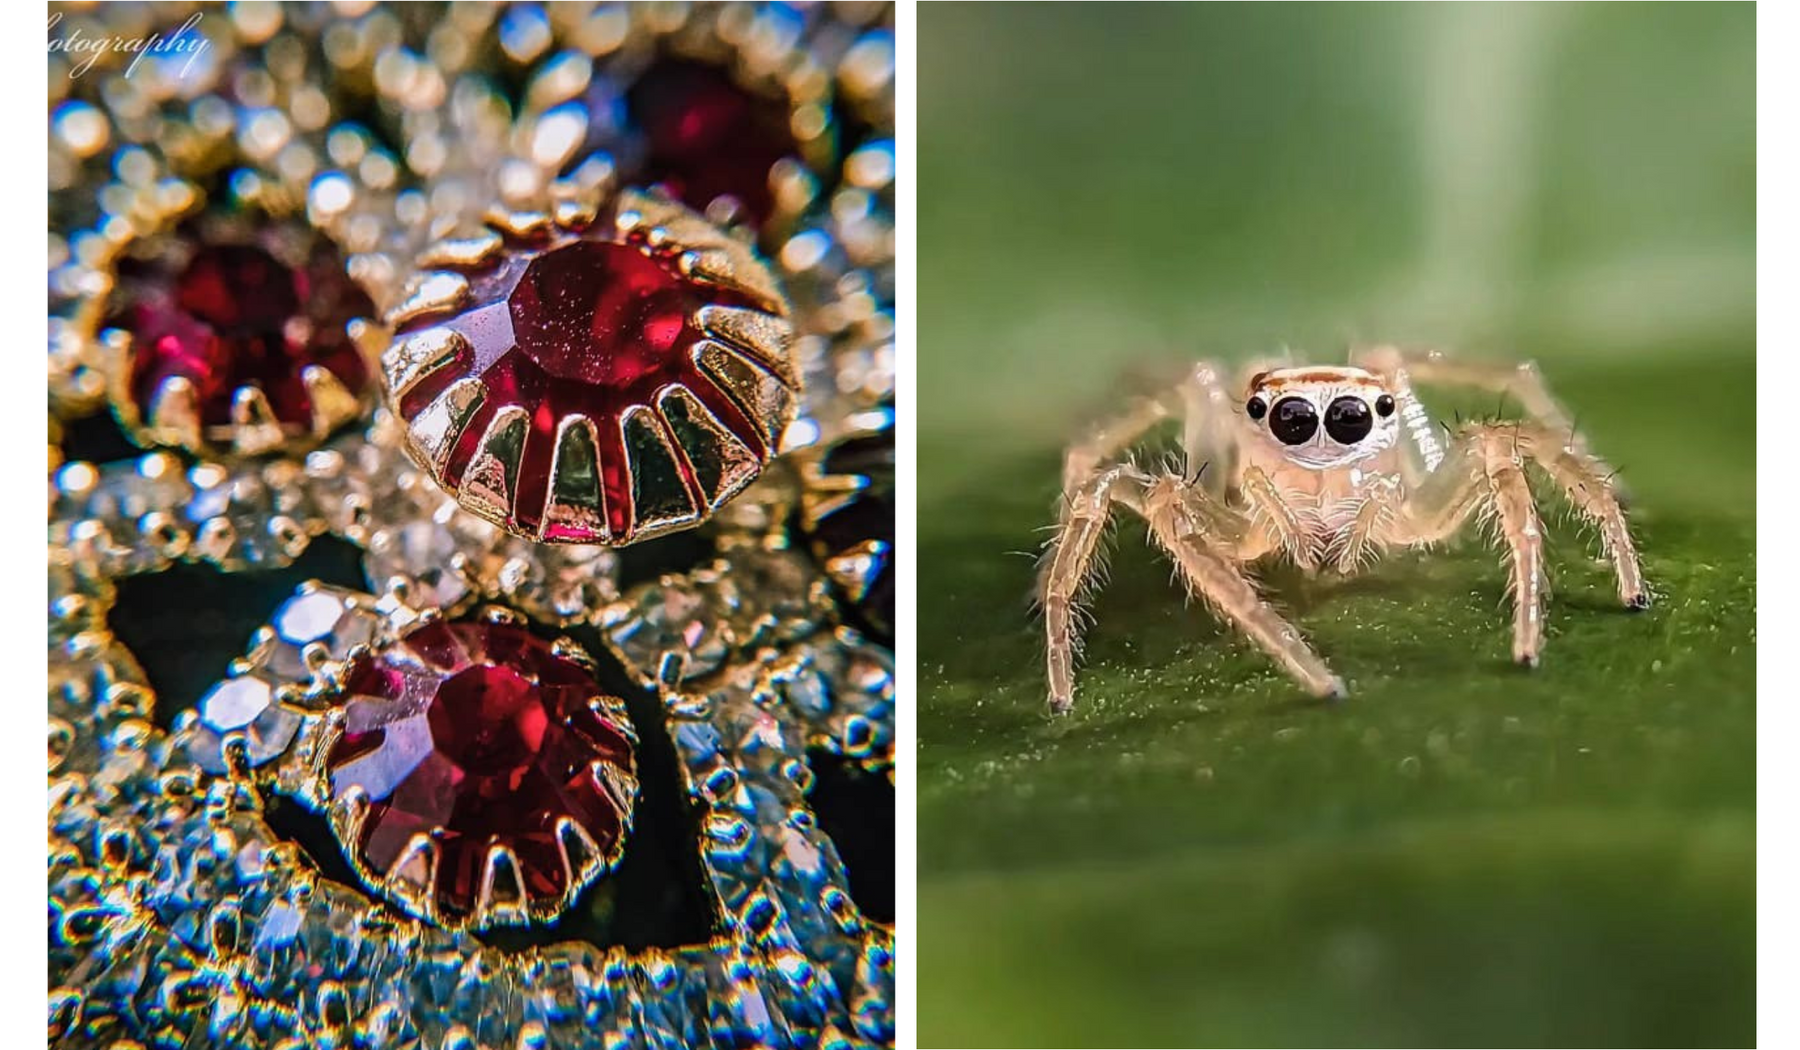 Ever wondered about big details in tiny objects? How does a macro lens help?